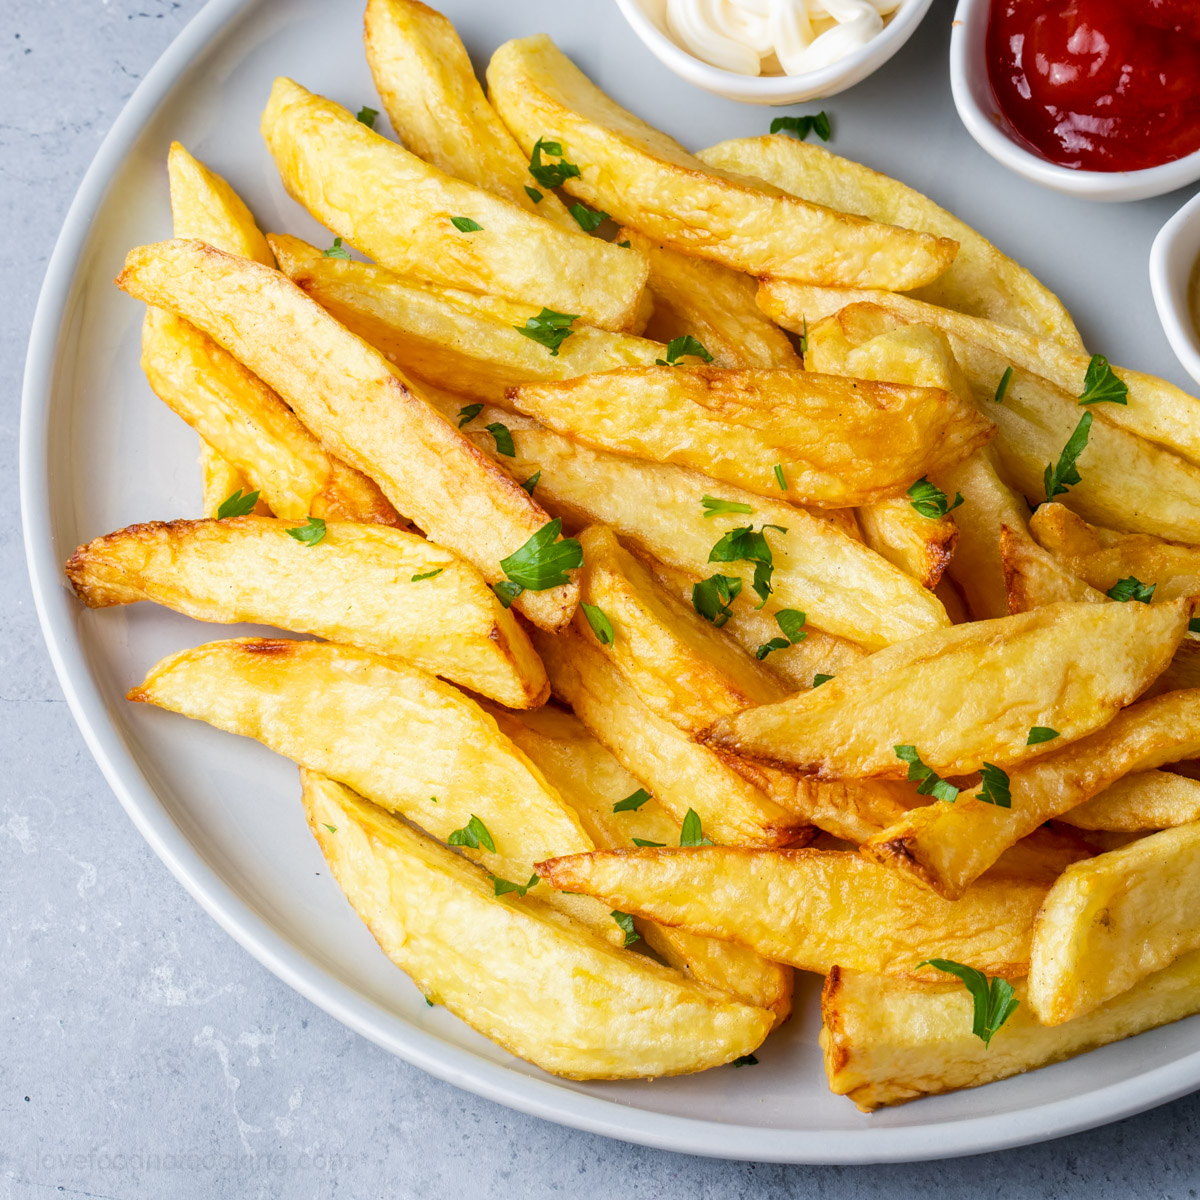 https://lovefoodnotcooking.com/wp-content/uploads/2023/06/homemade-french-fries-air-fryer-recipe-s.jpg